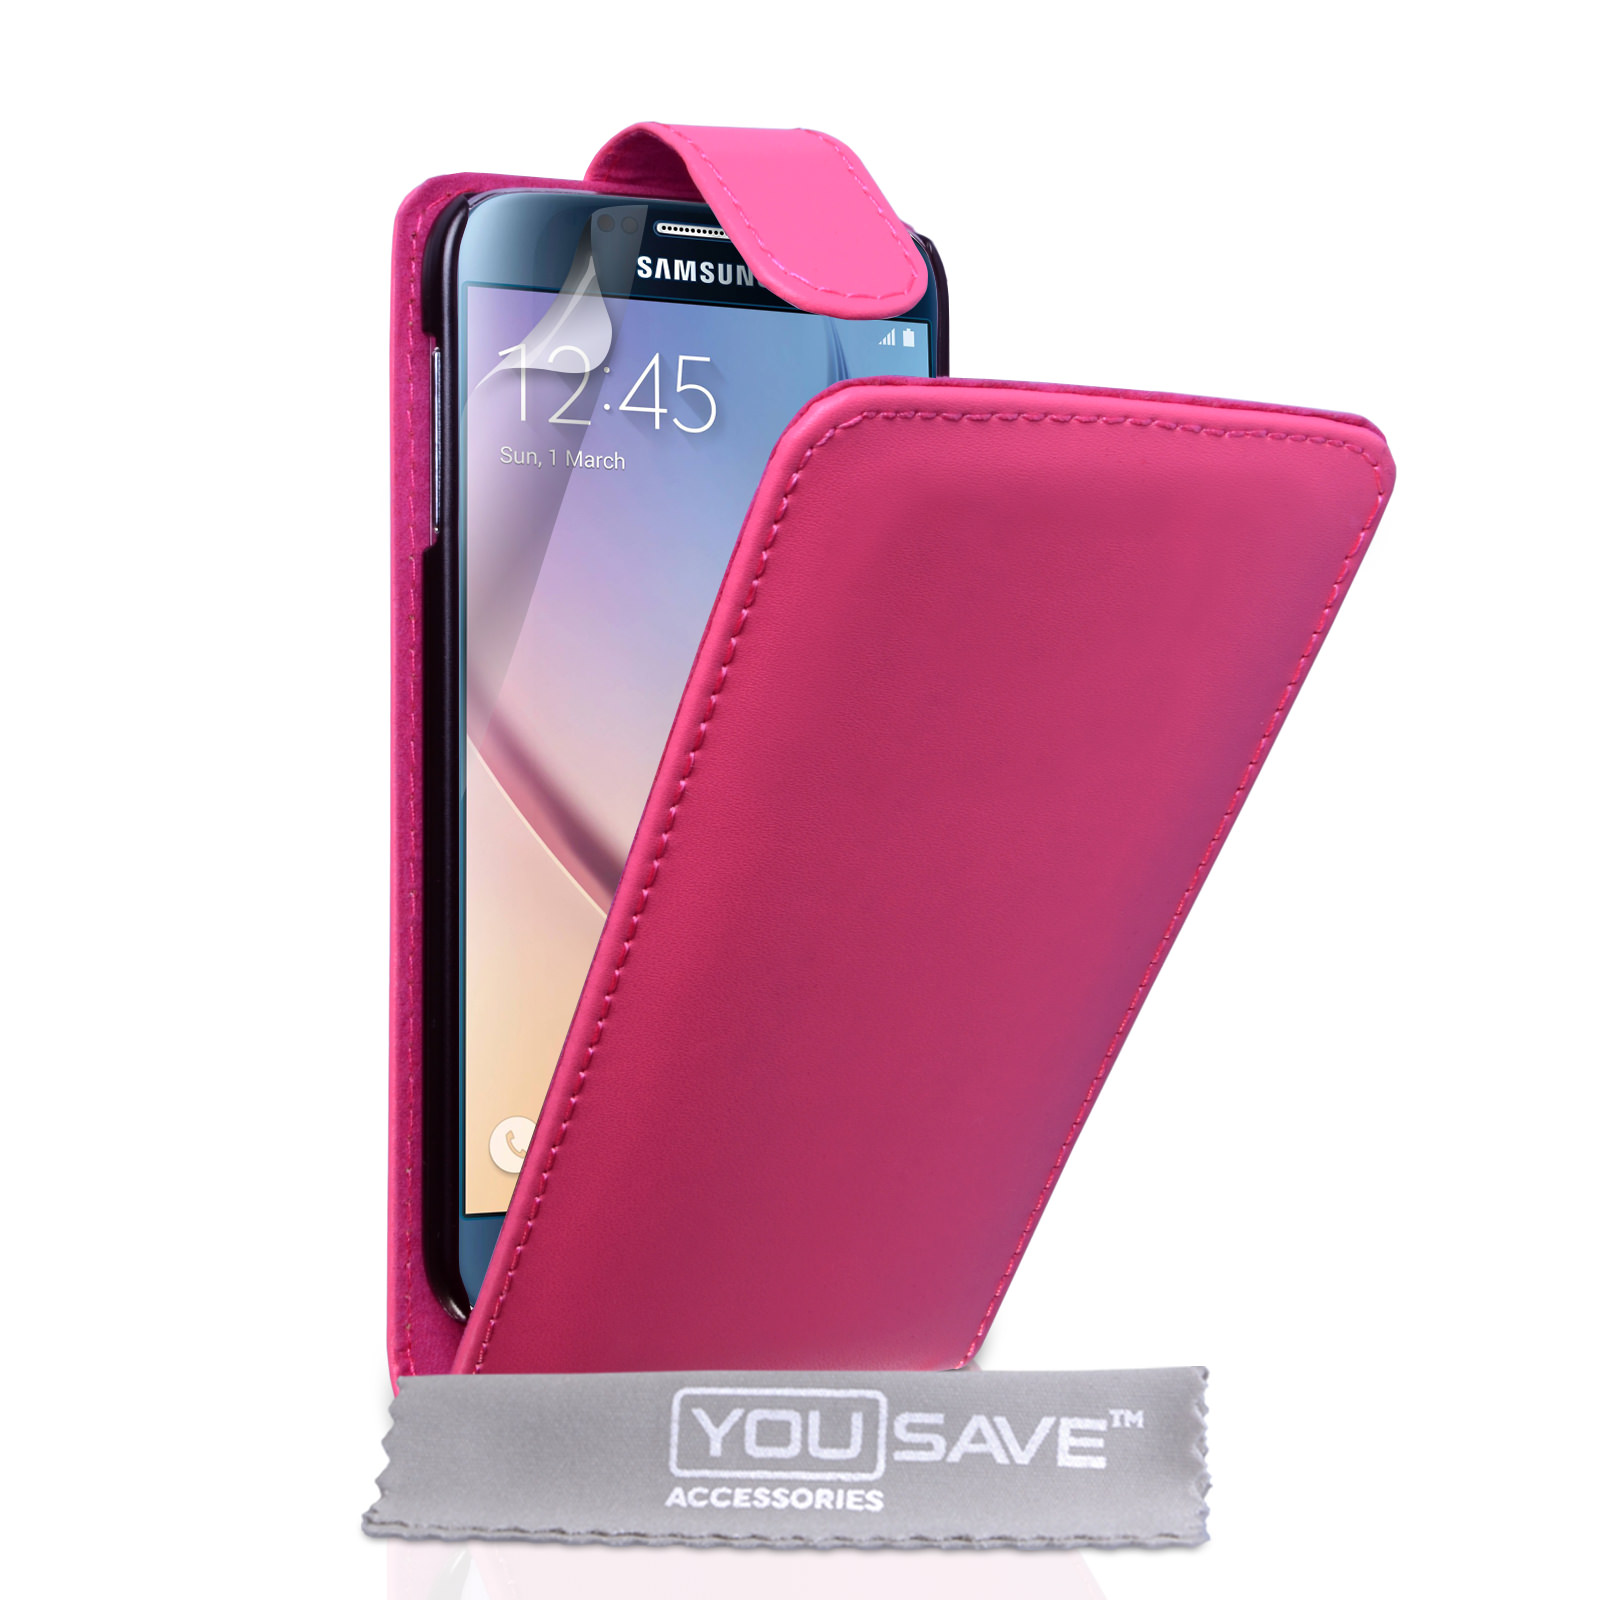 YouSave Samsung Galaxy S6 Leather-Effect Flip Case - Hot Pink